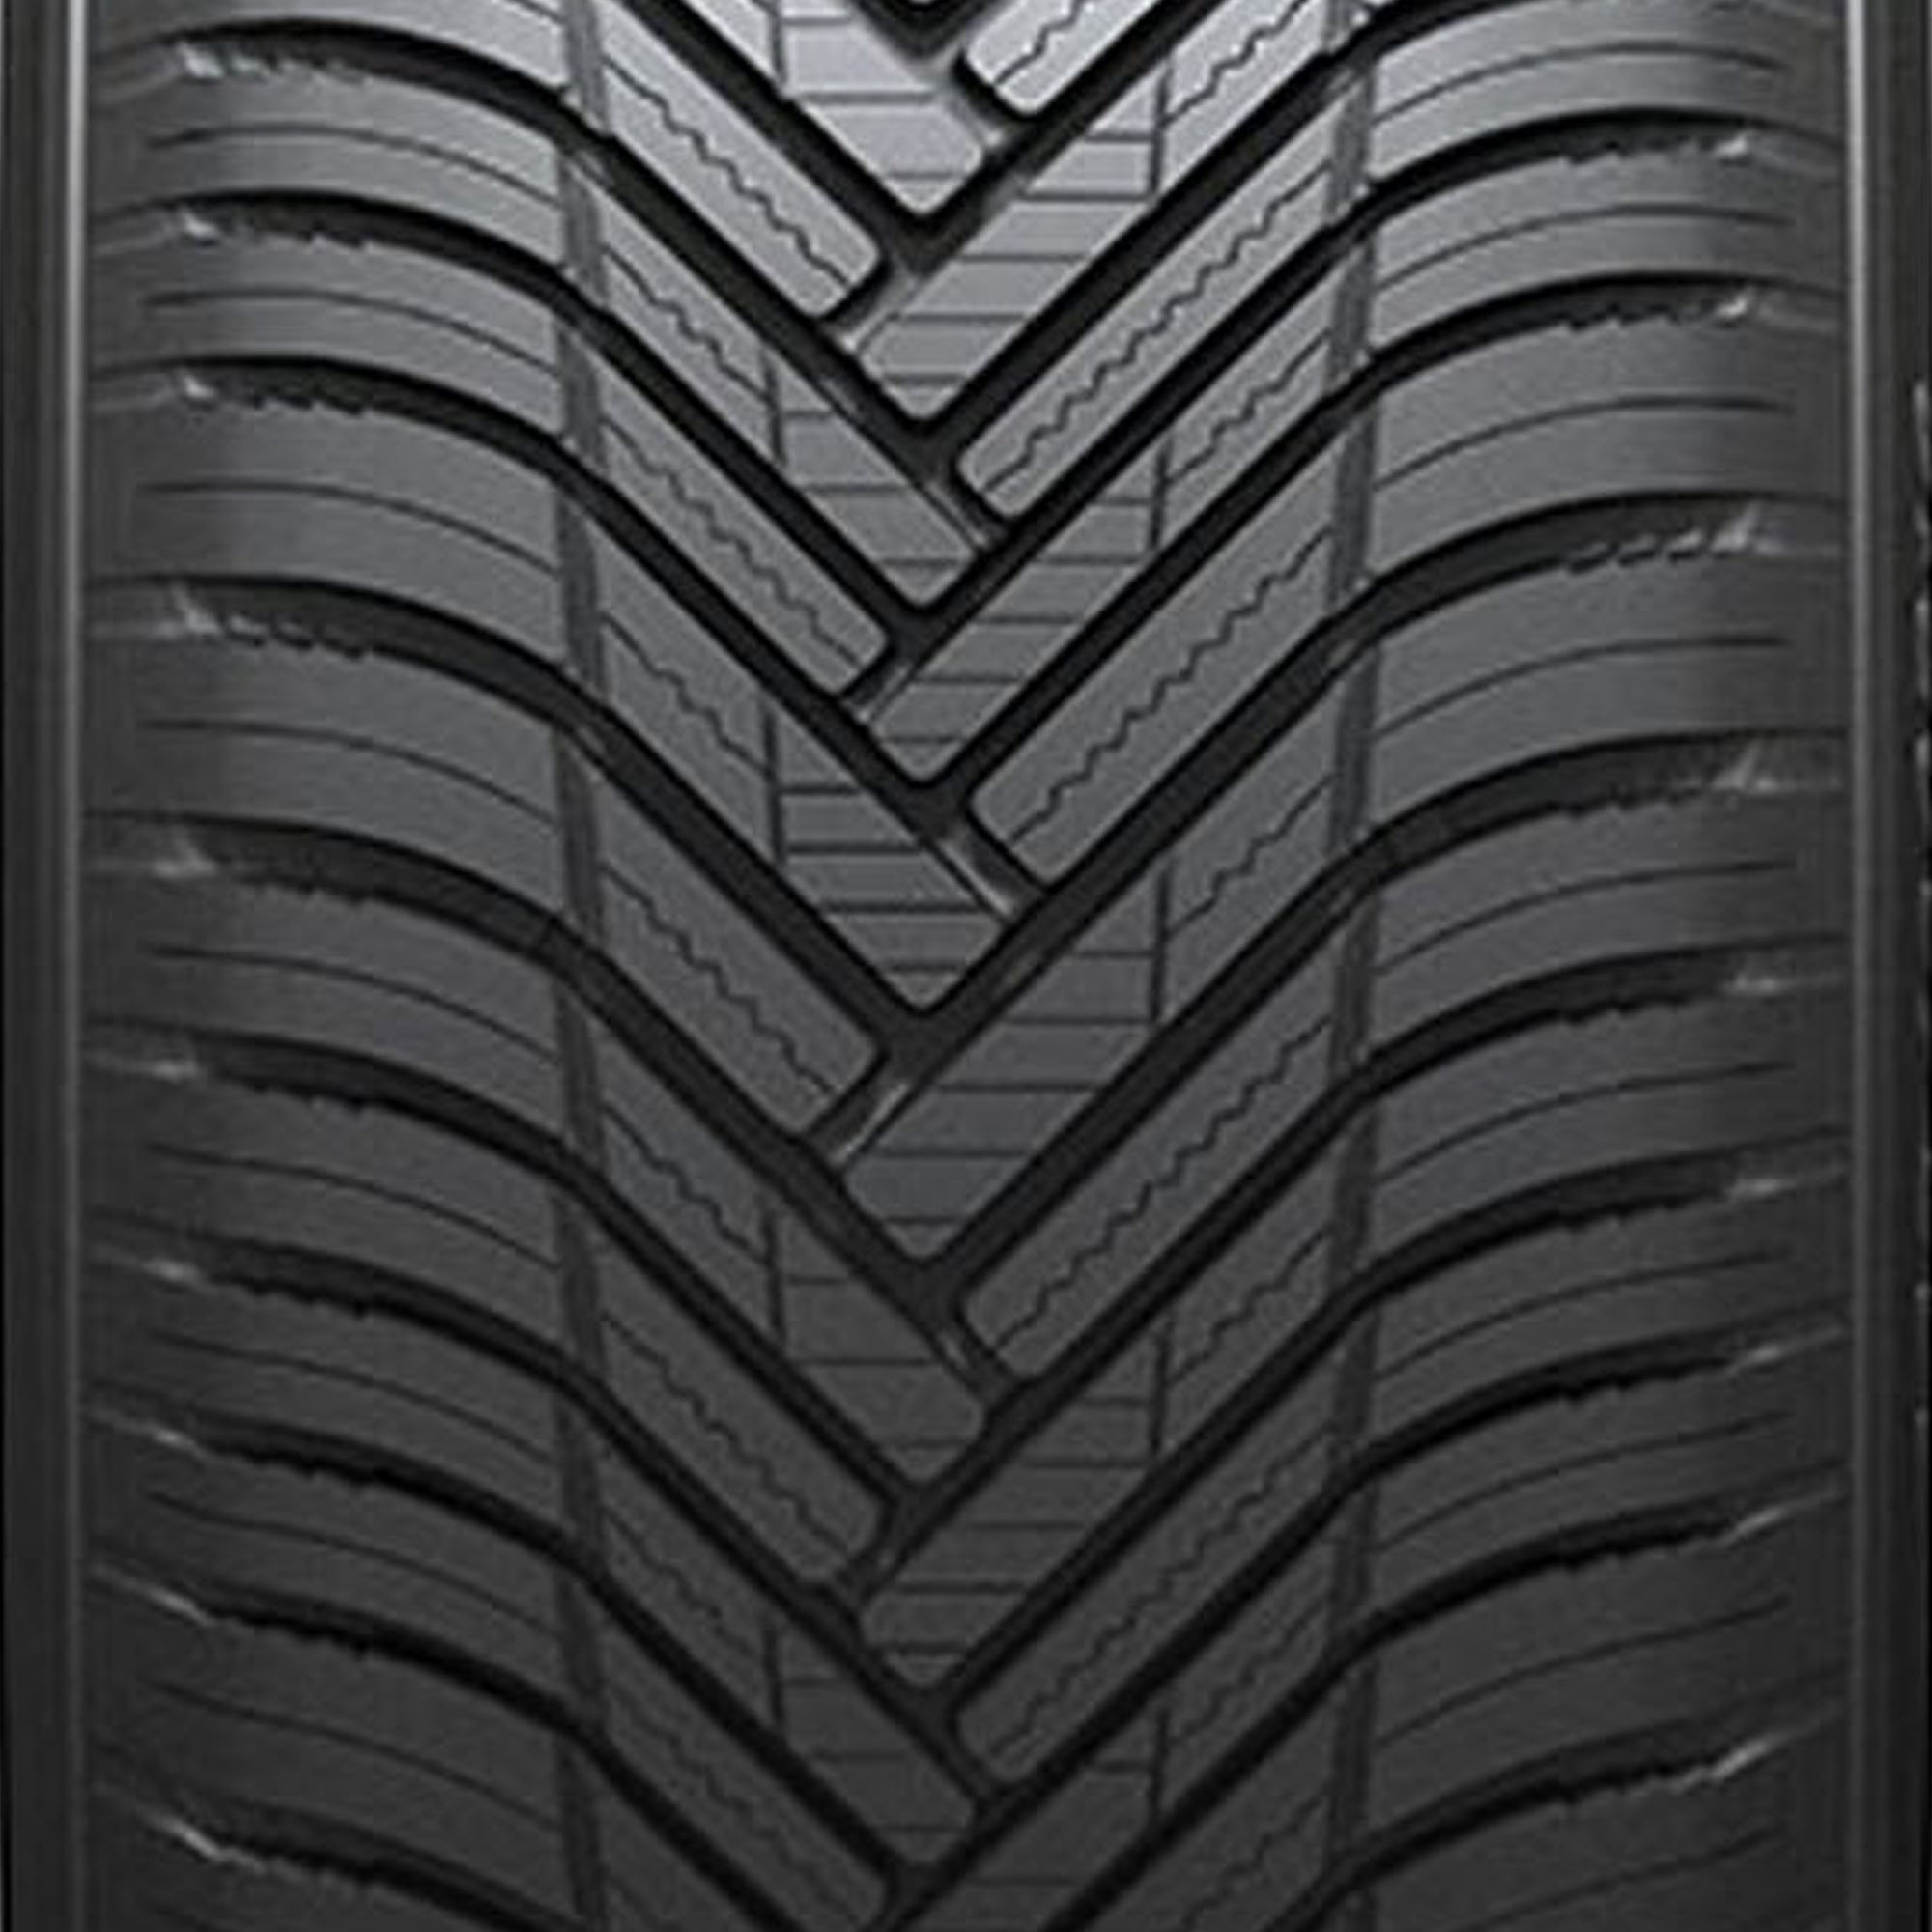 Hankook Kinergy 4S2 X (H750A) All Weather 225/60R17 99H SUV/Crossover Tire - image 4 of 4